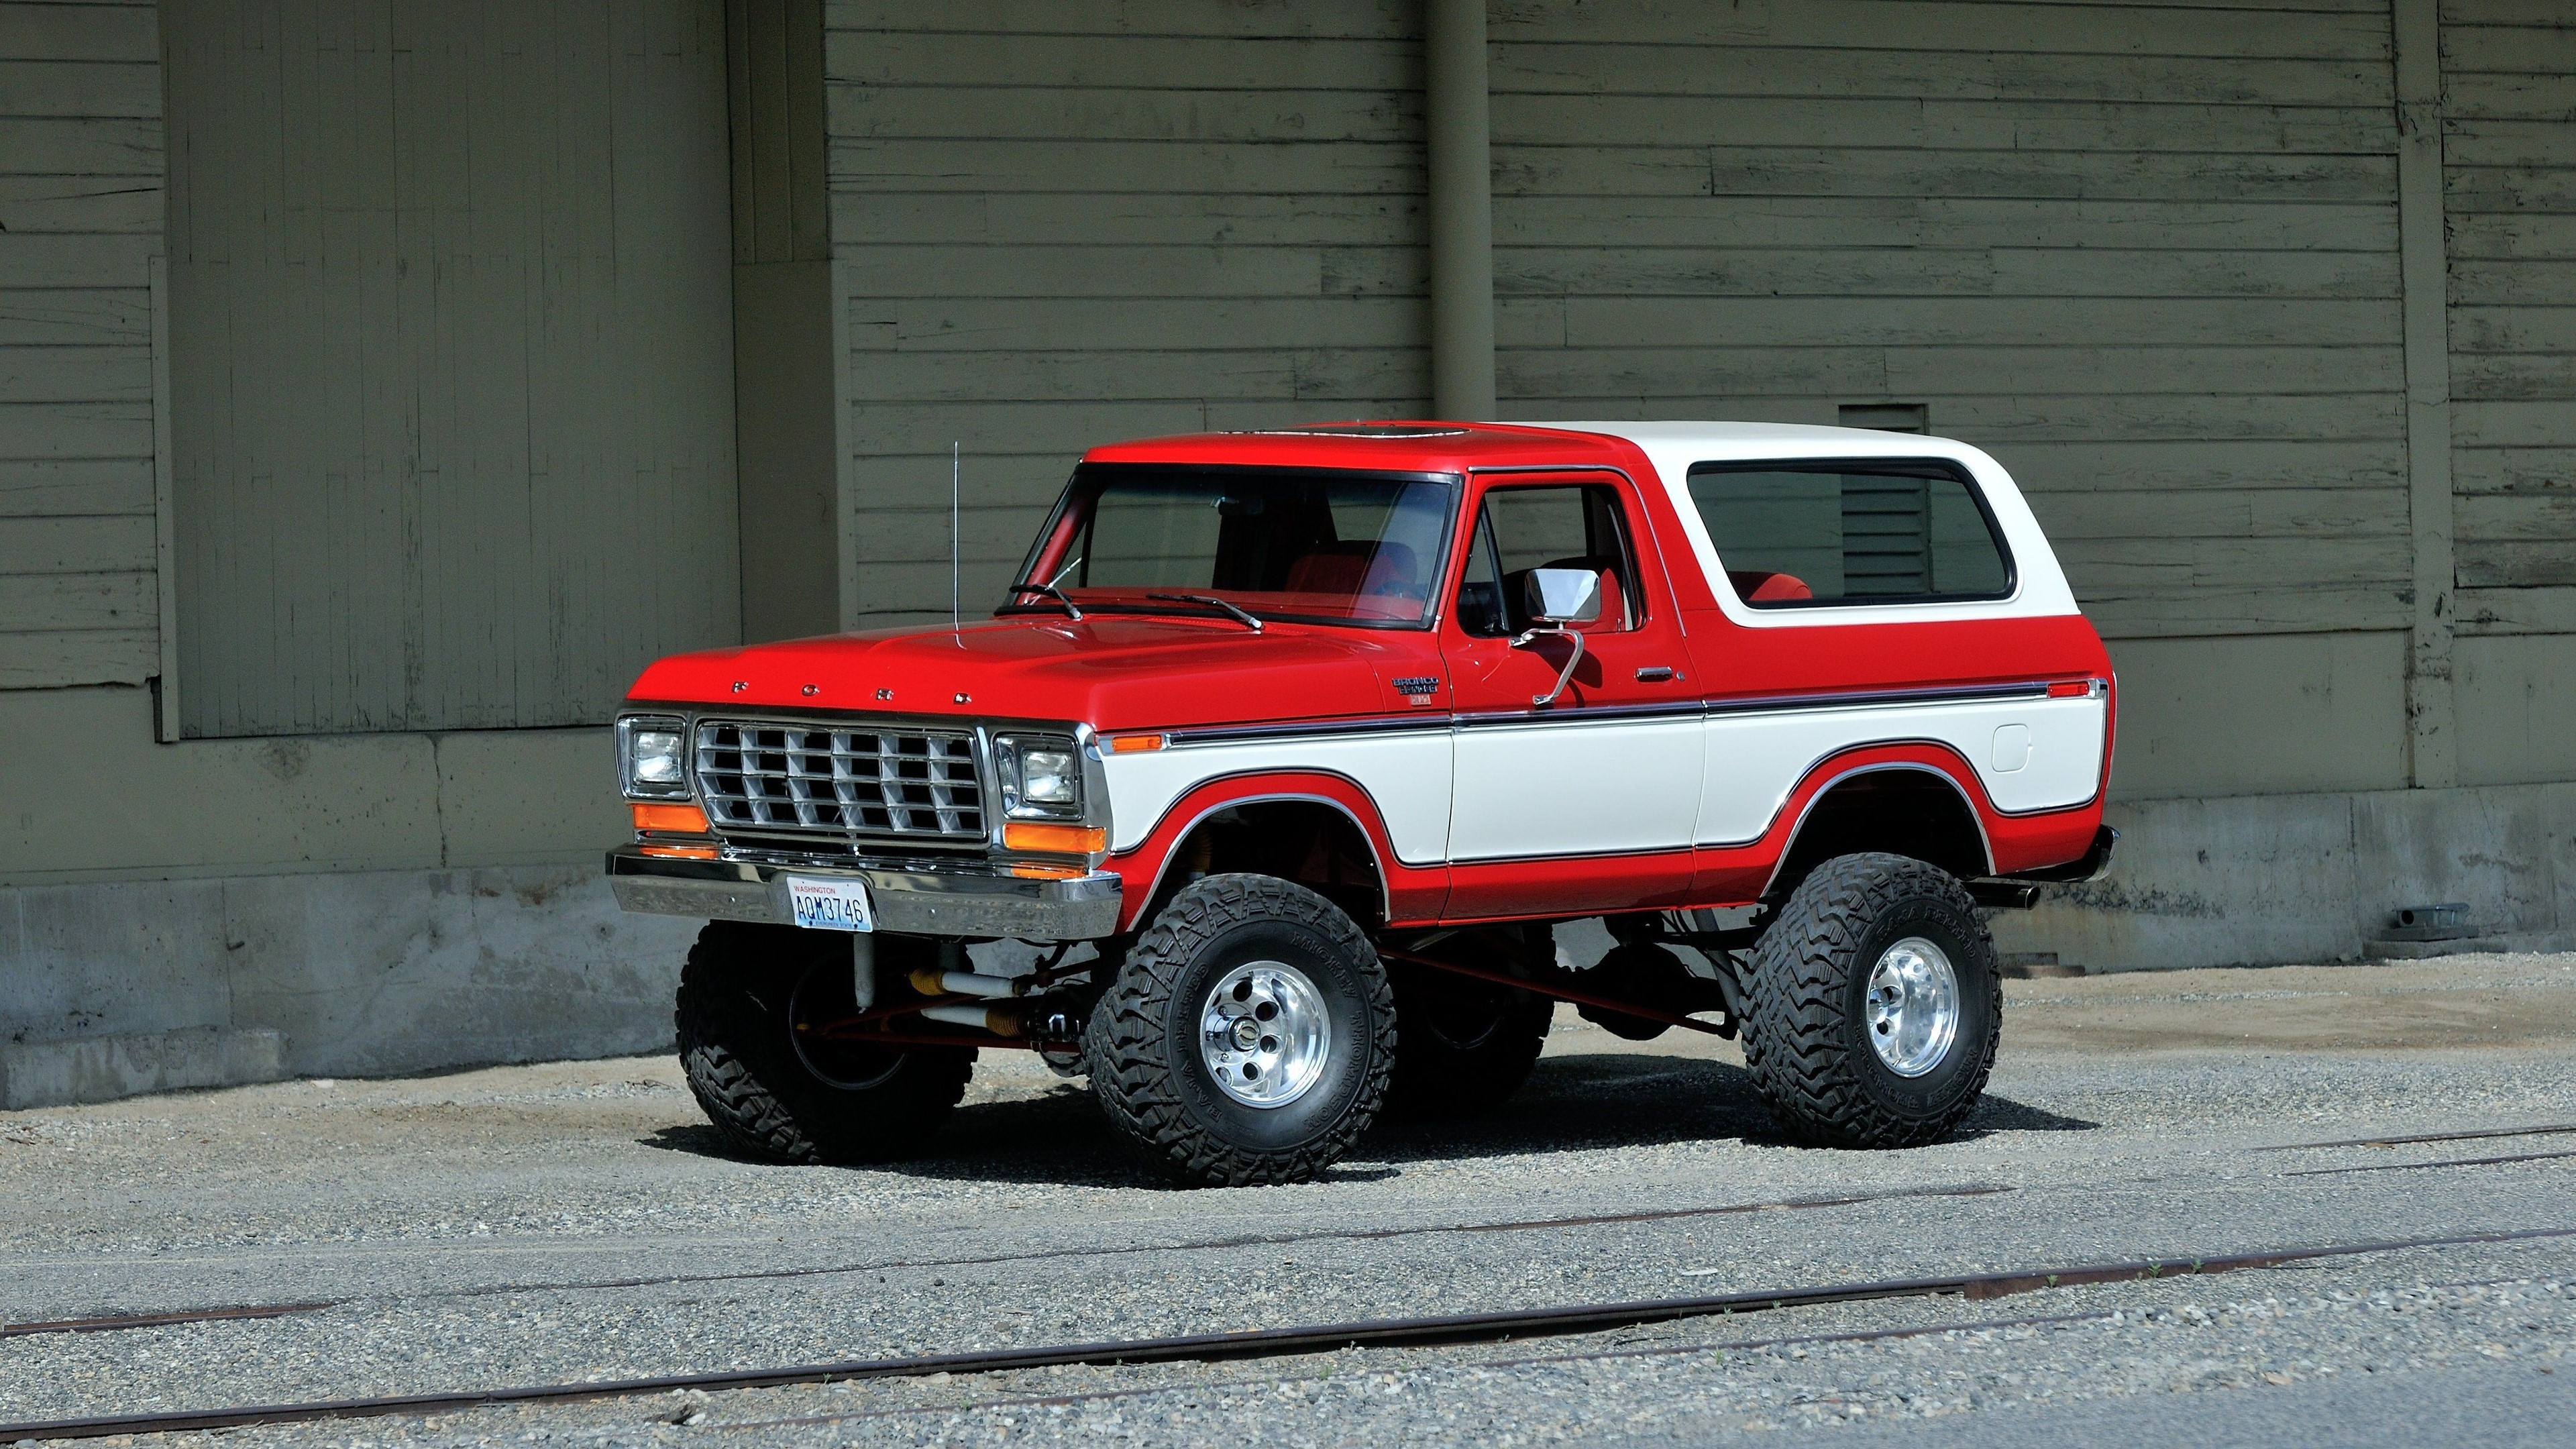 Ford Bronco: Utility Trailer, Classic Compact All-Road Car, 1979, Cross-country Vehicle. 3840x2160 4K Wallpaper.